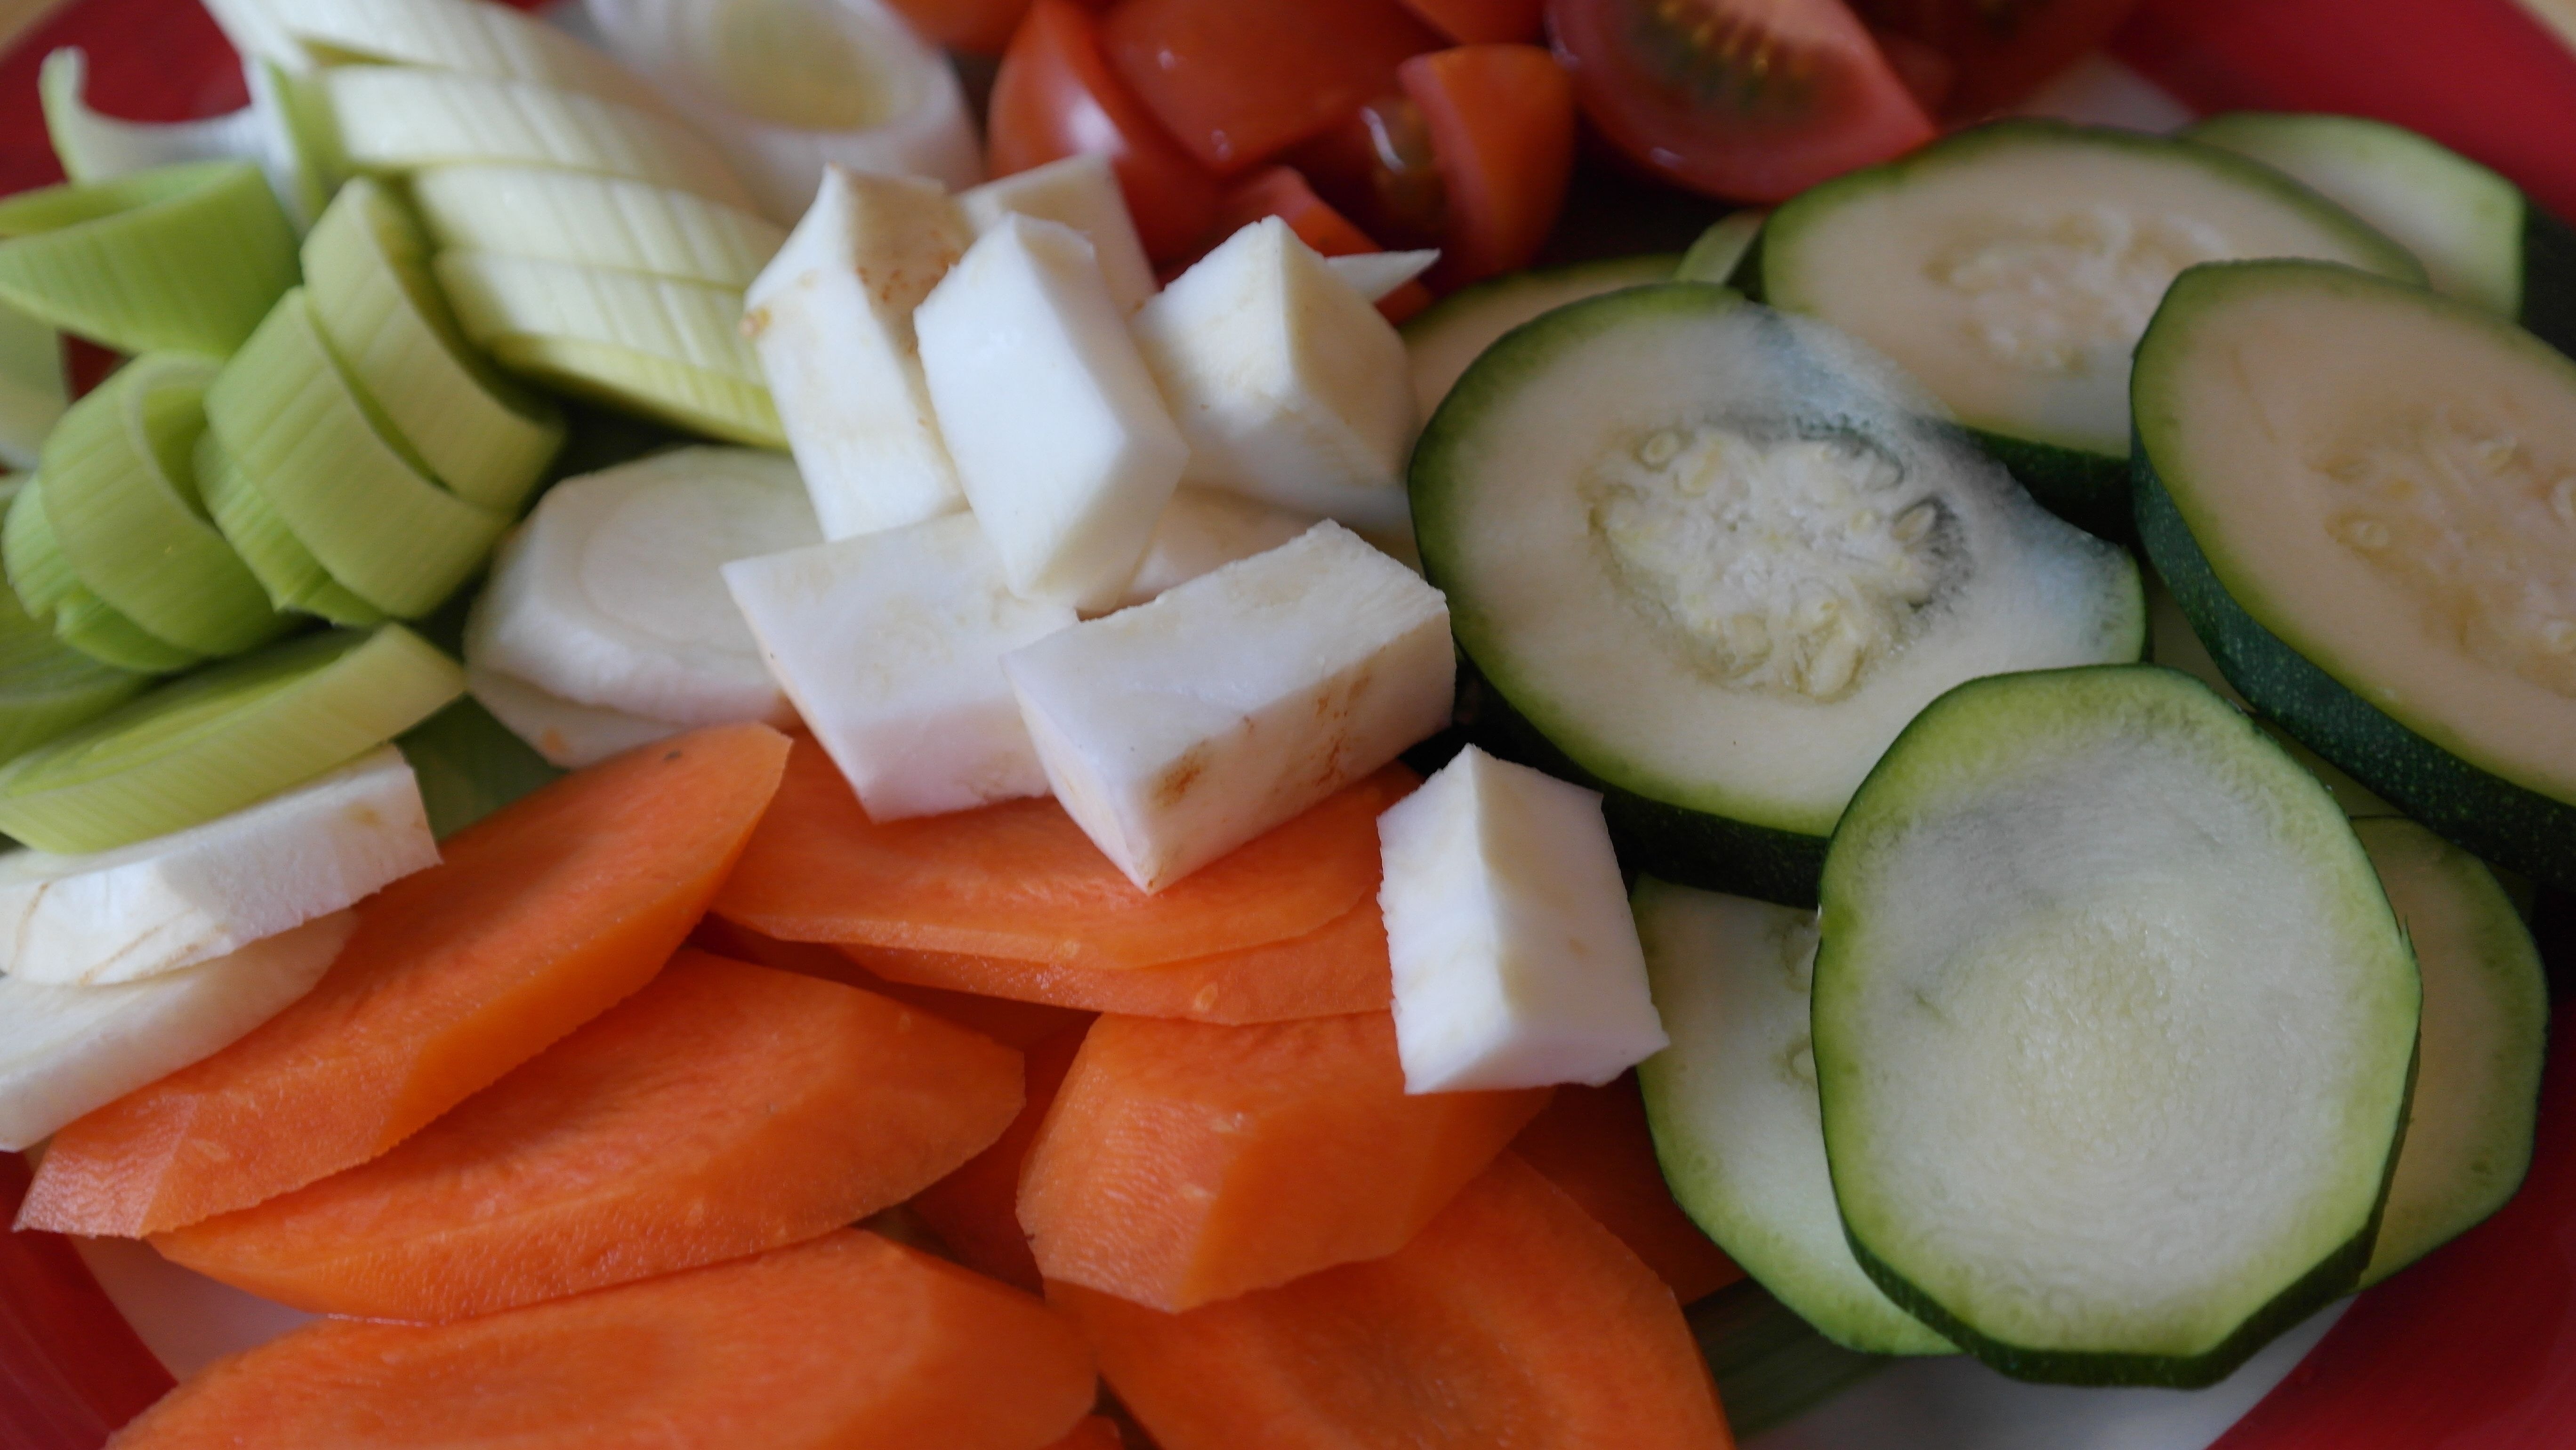 sliced cucumber, carrots and cherry tomato lot